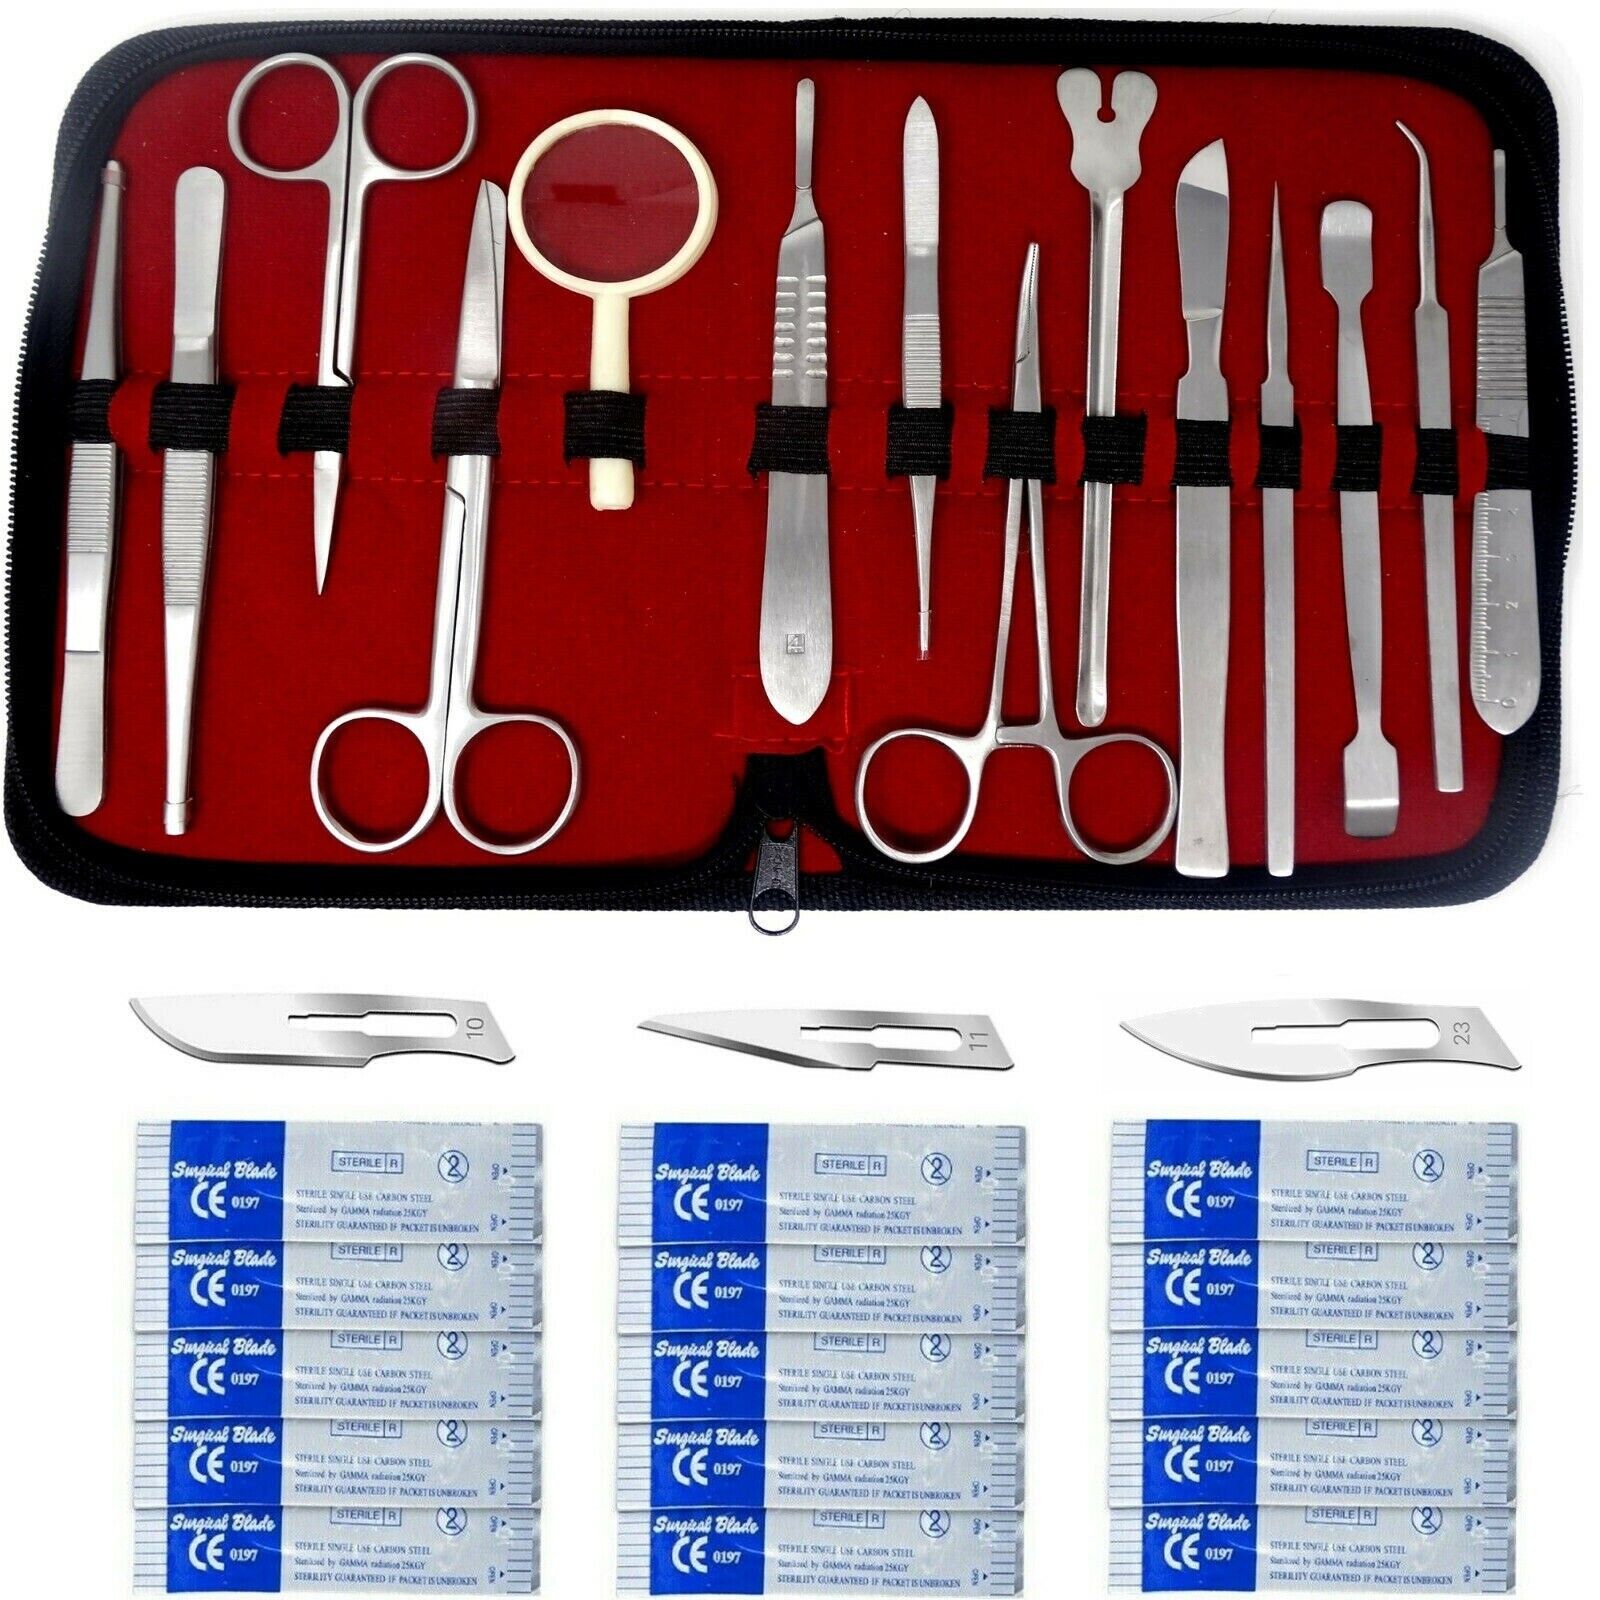 44 Pcs Science Students & Teacher Dissection Kit Advanced Dissection Instruments HTI Does Not Apply